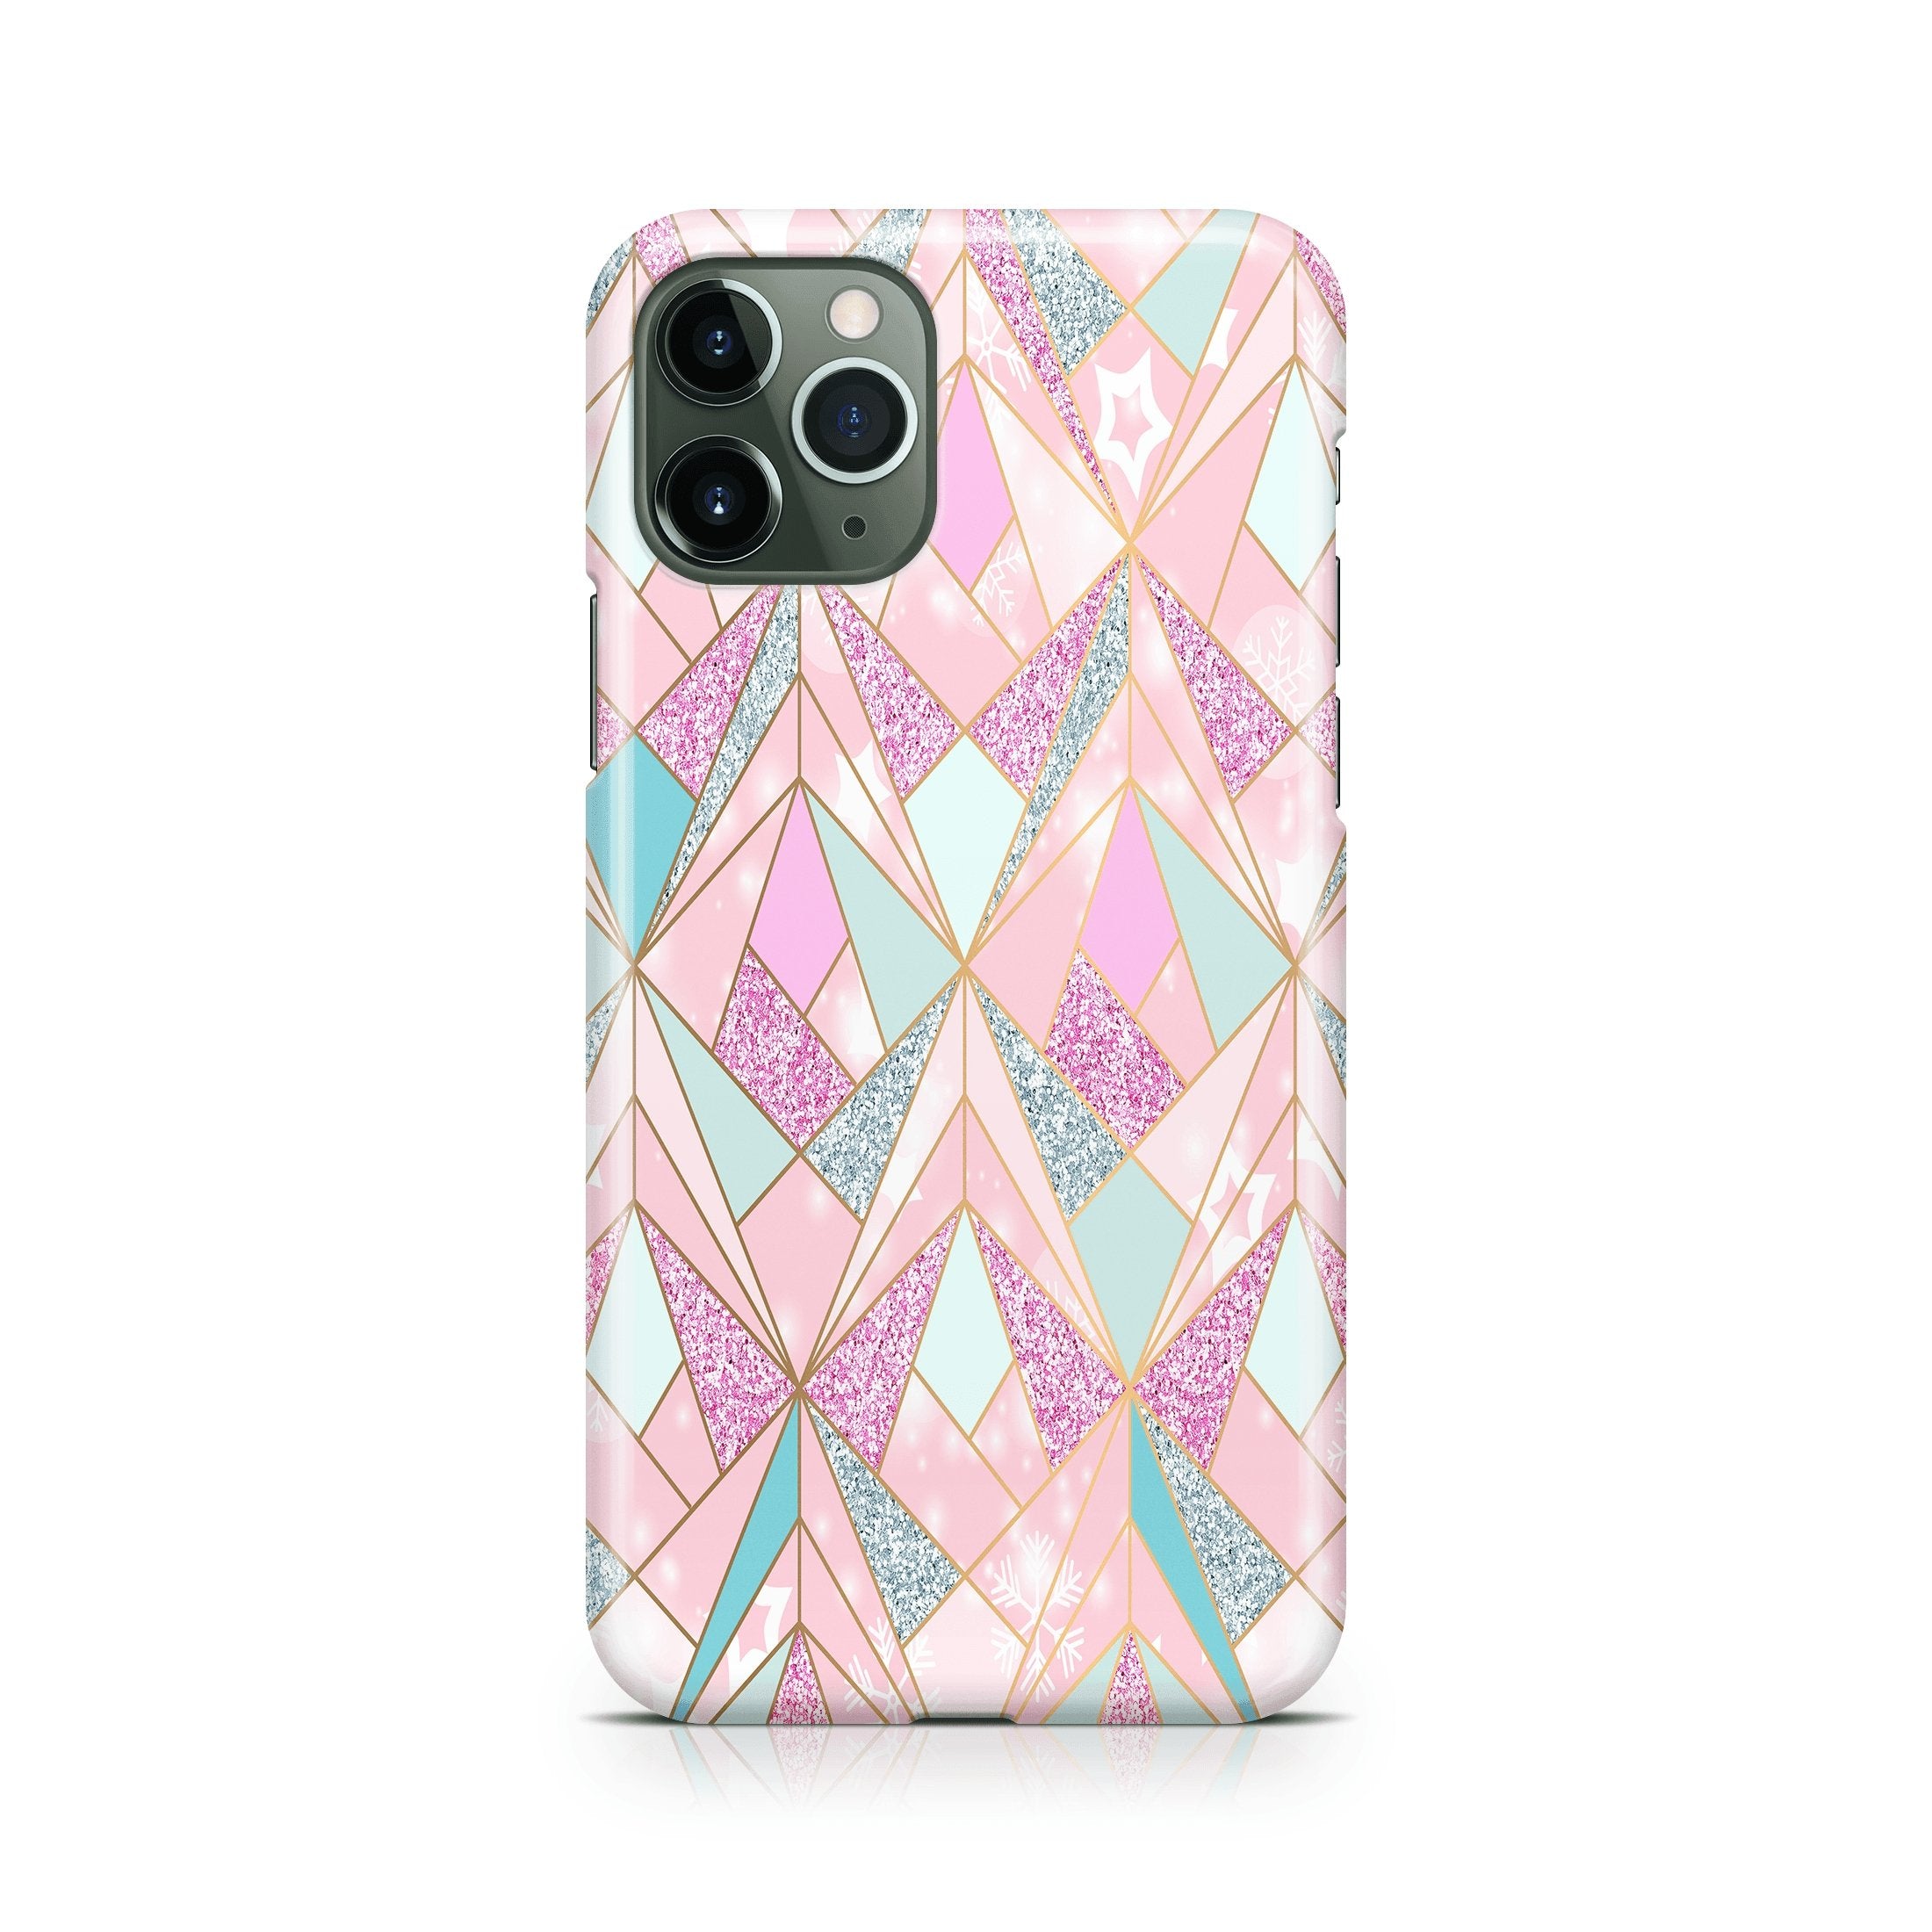 Geometric Winter - iPhone phone case designs by CaseSwagger